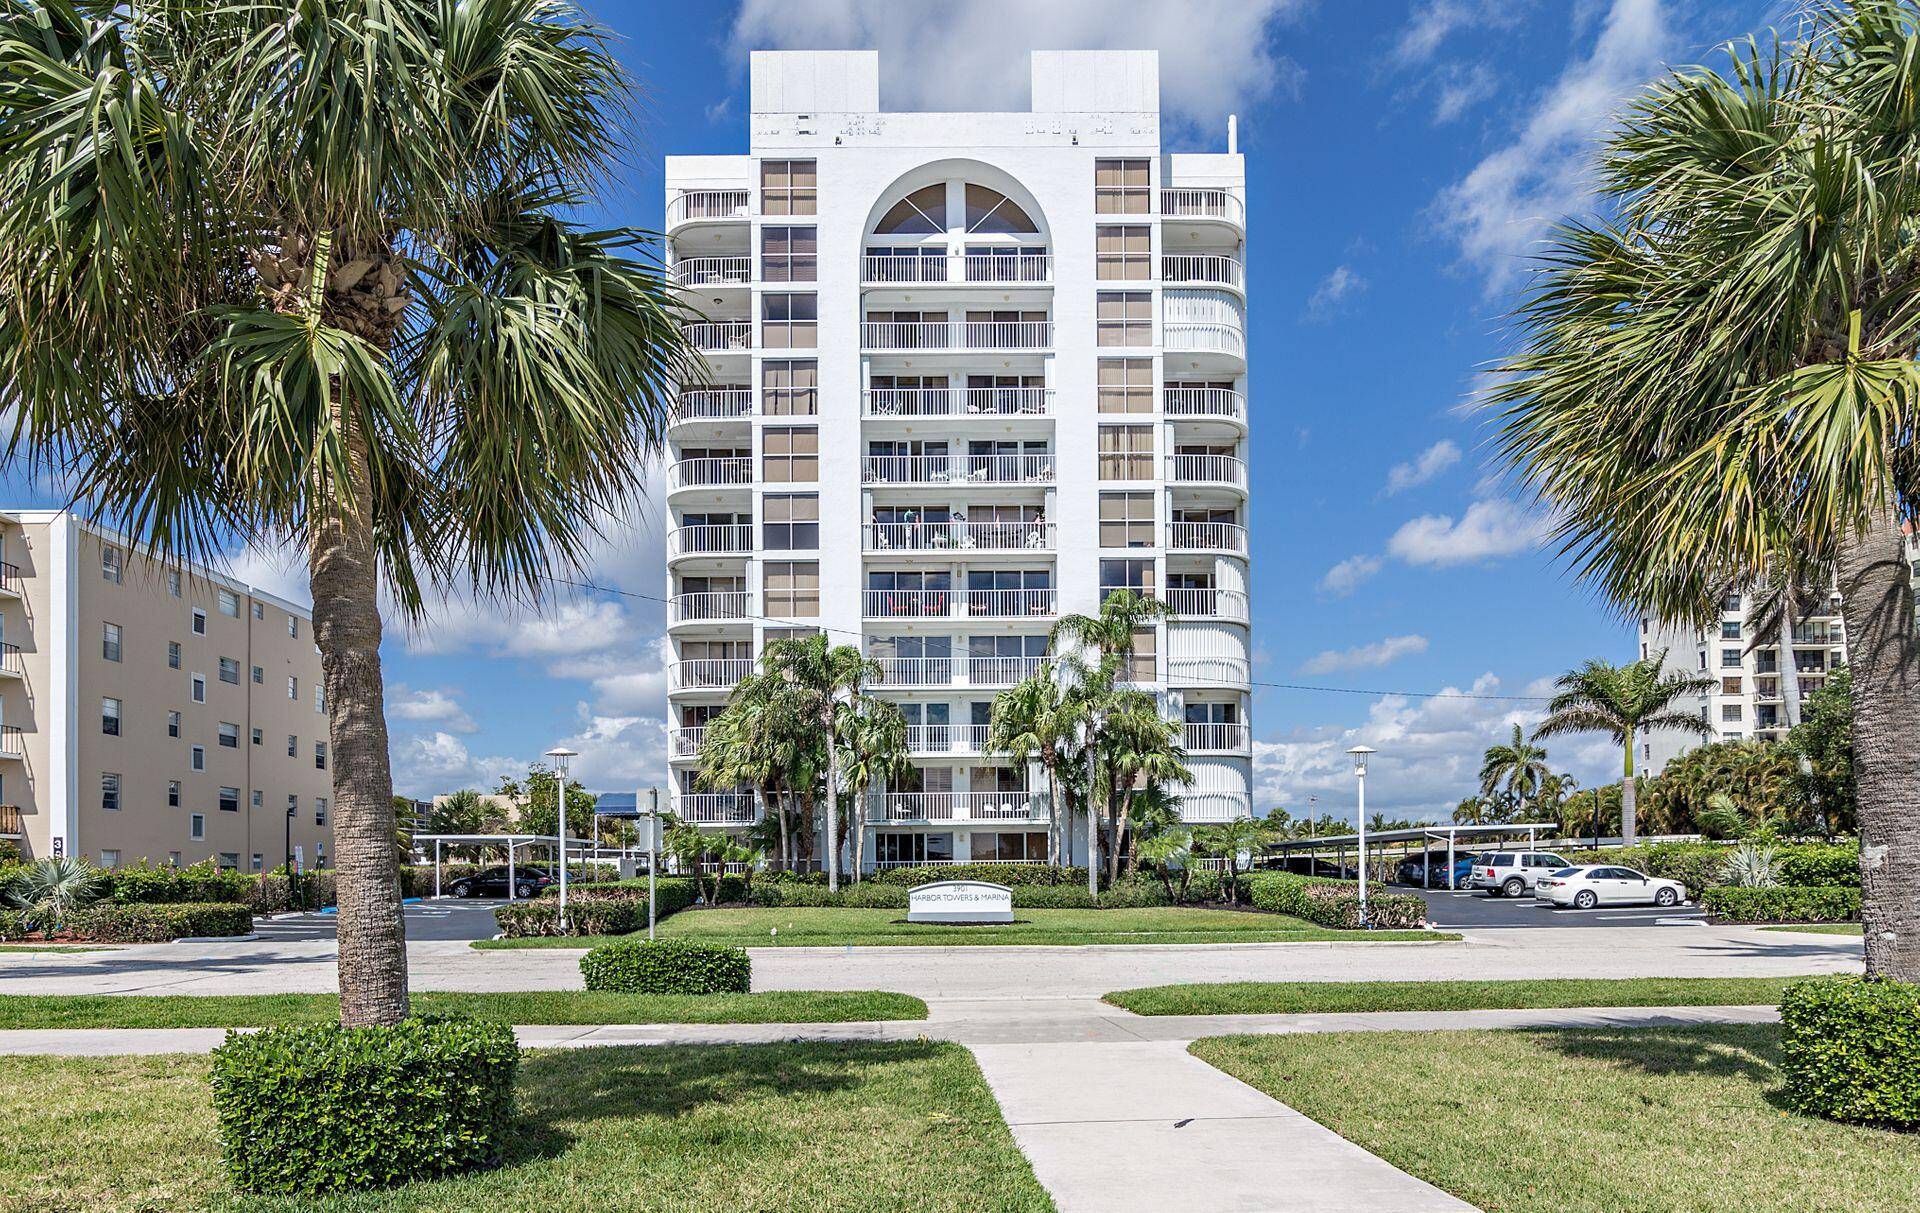 Enjoy beautiful Florida Sunsets with Western city views as well as Eastern water views in this bright natural lighted condo of Harbor Towers Marina.